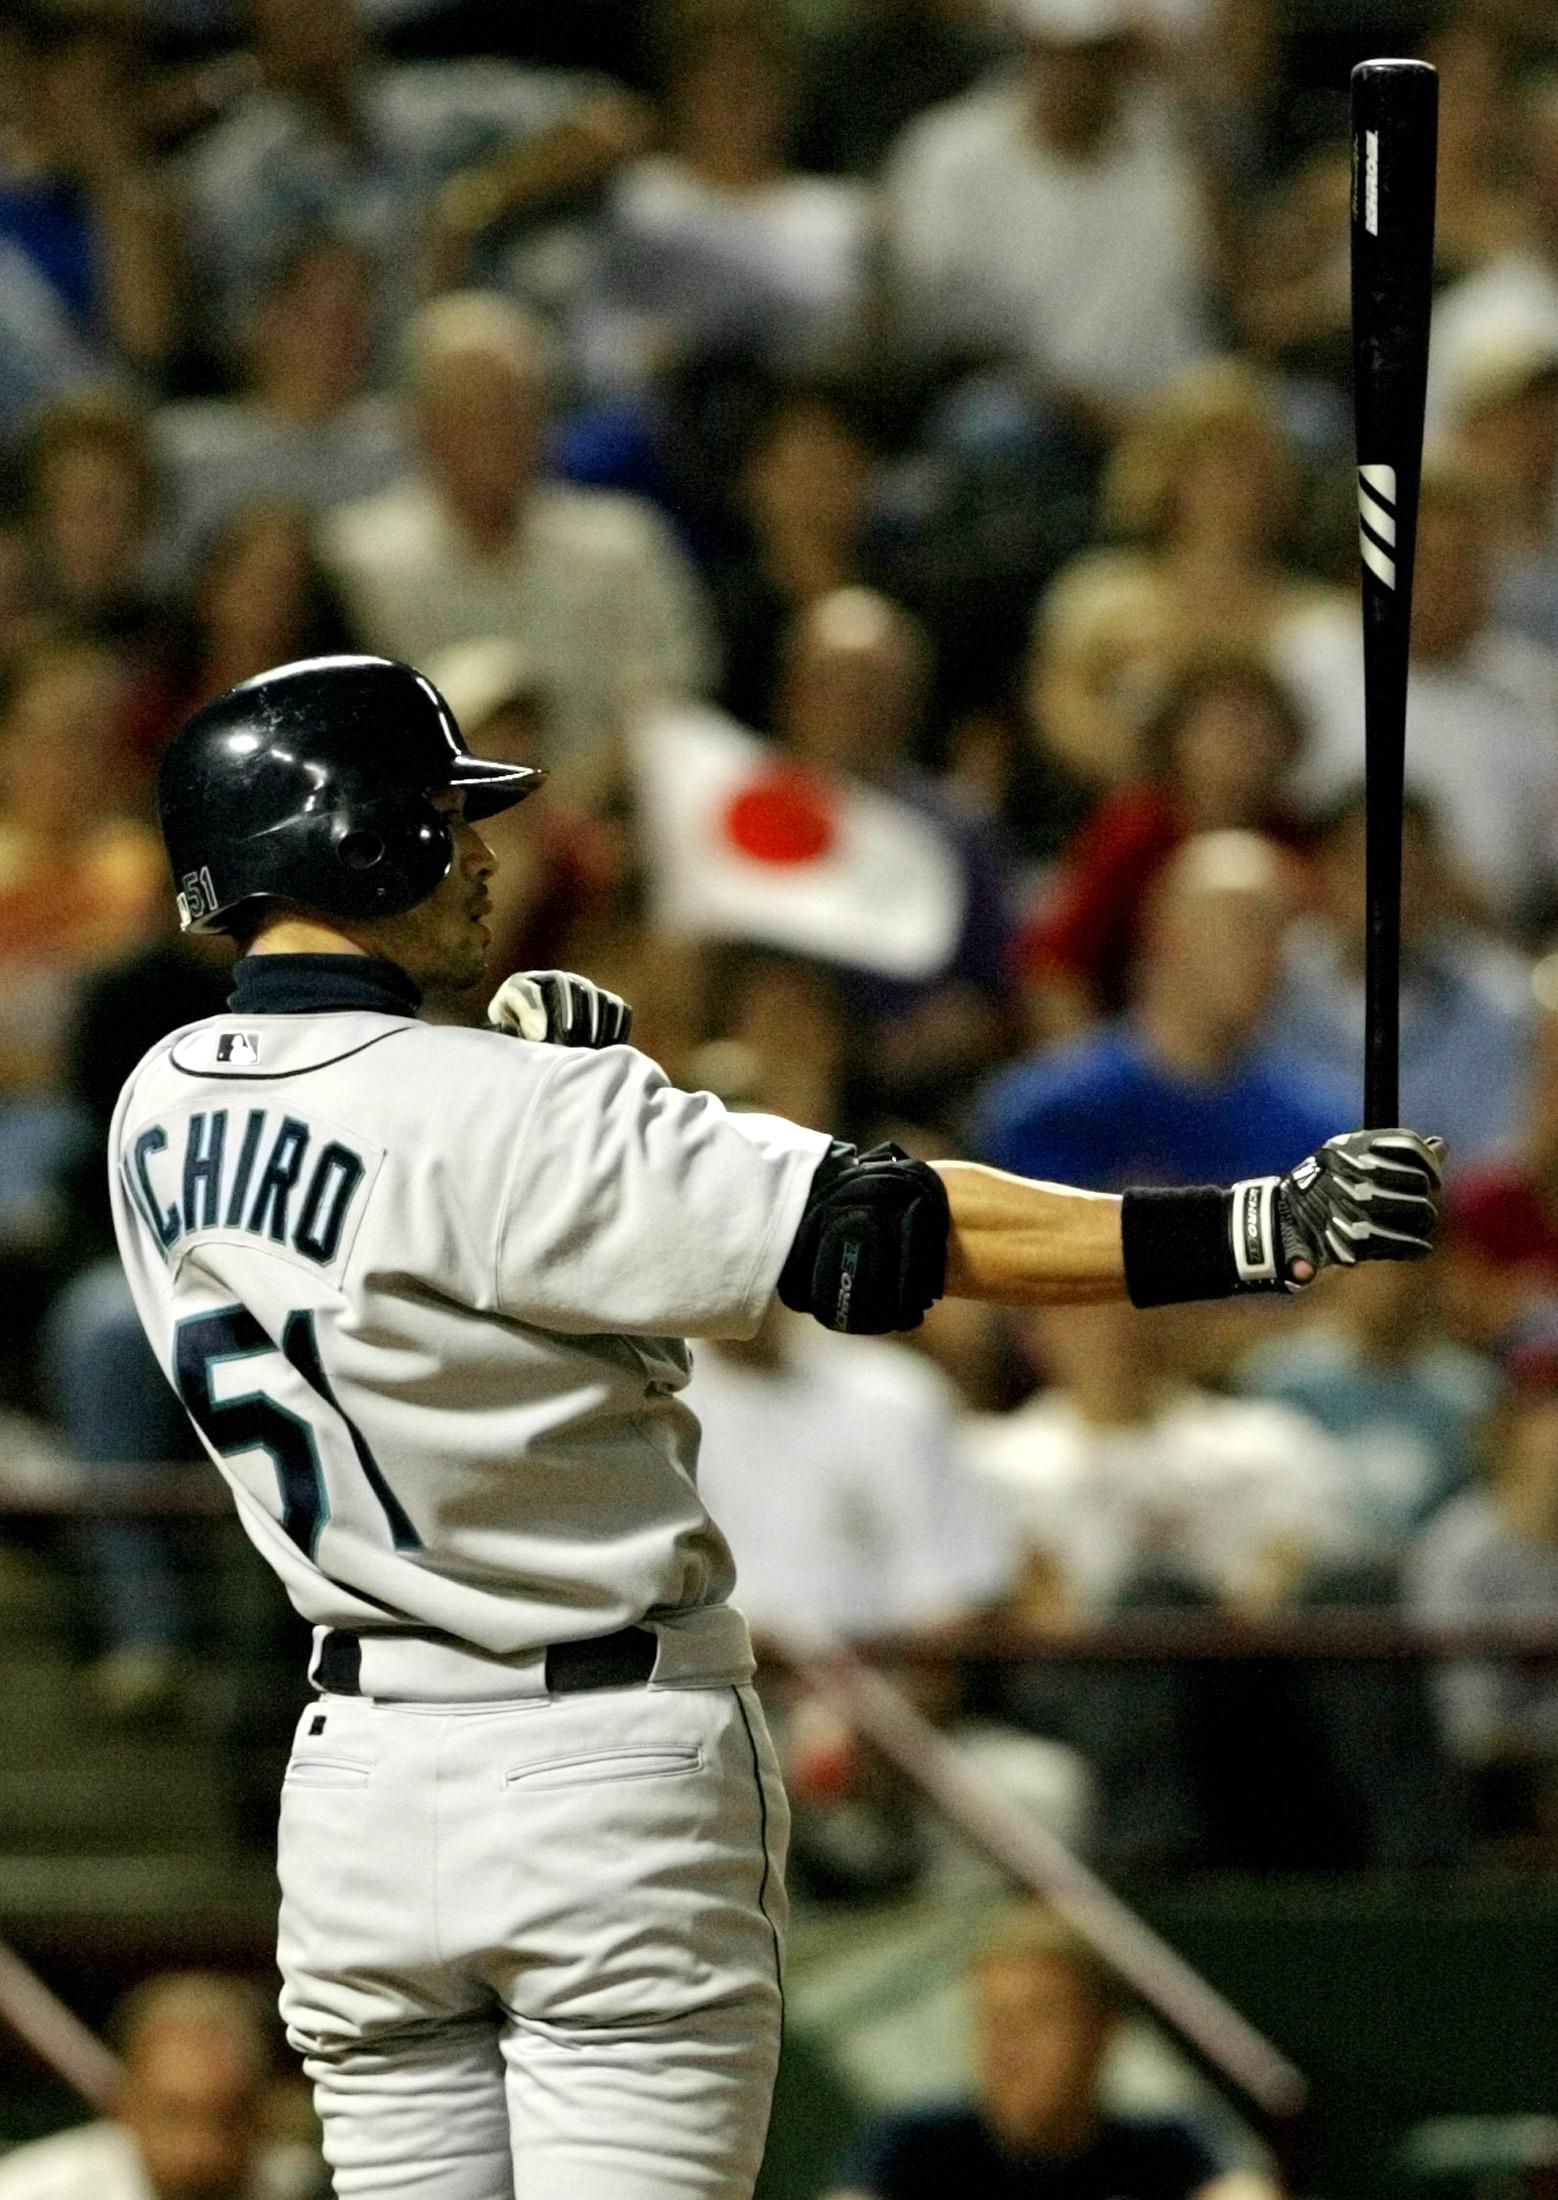 Seattle Mariners outfielder Ichiro sets up in the batter's box as a fan waves a Japanese flag in the background at a game against the Texas Rangers in Arlington, Texas, September 24, 2004. Ichiro would break the record for most hits in a single season tha